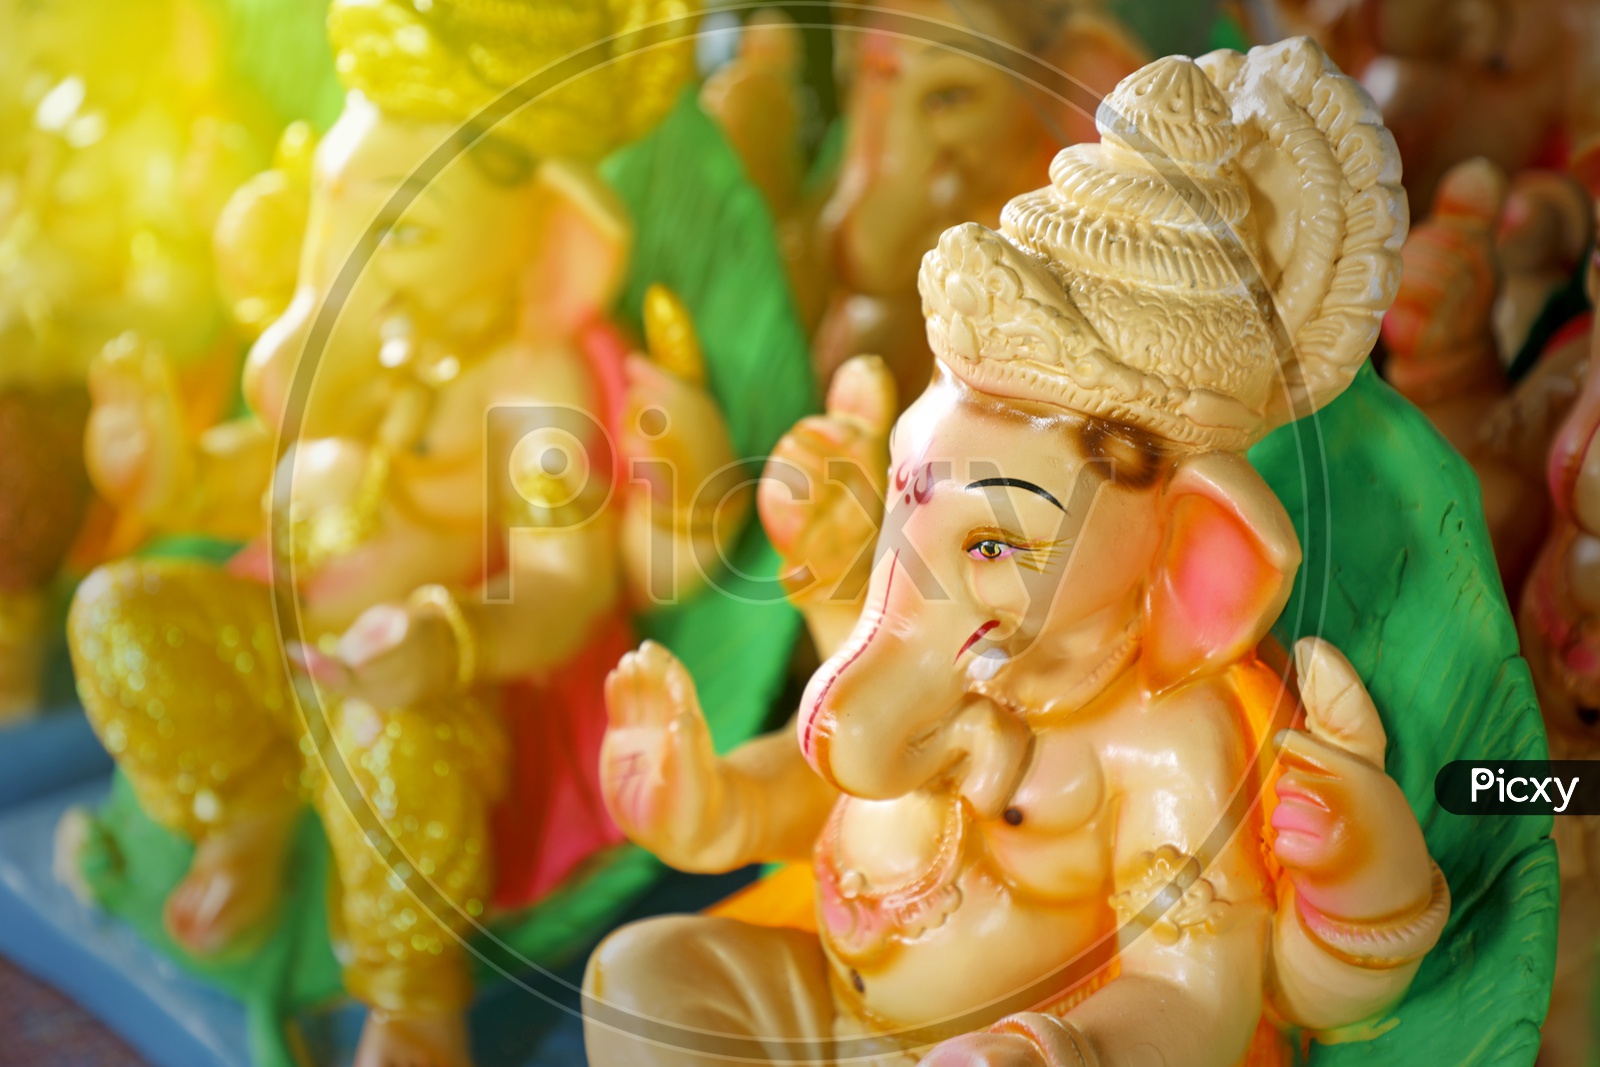 Lord Ganesh Idol placed in a sequence